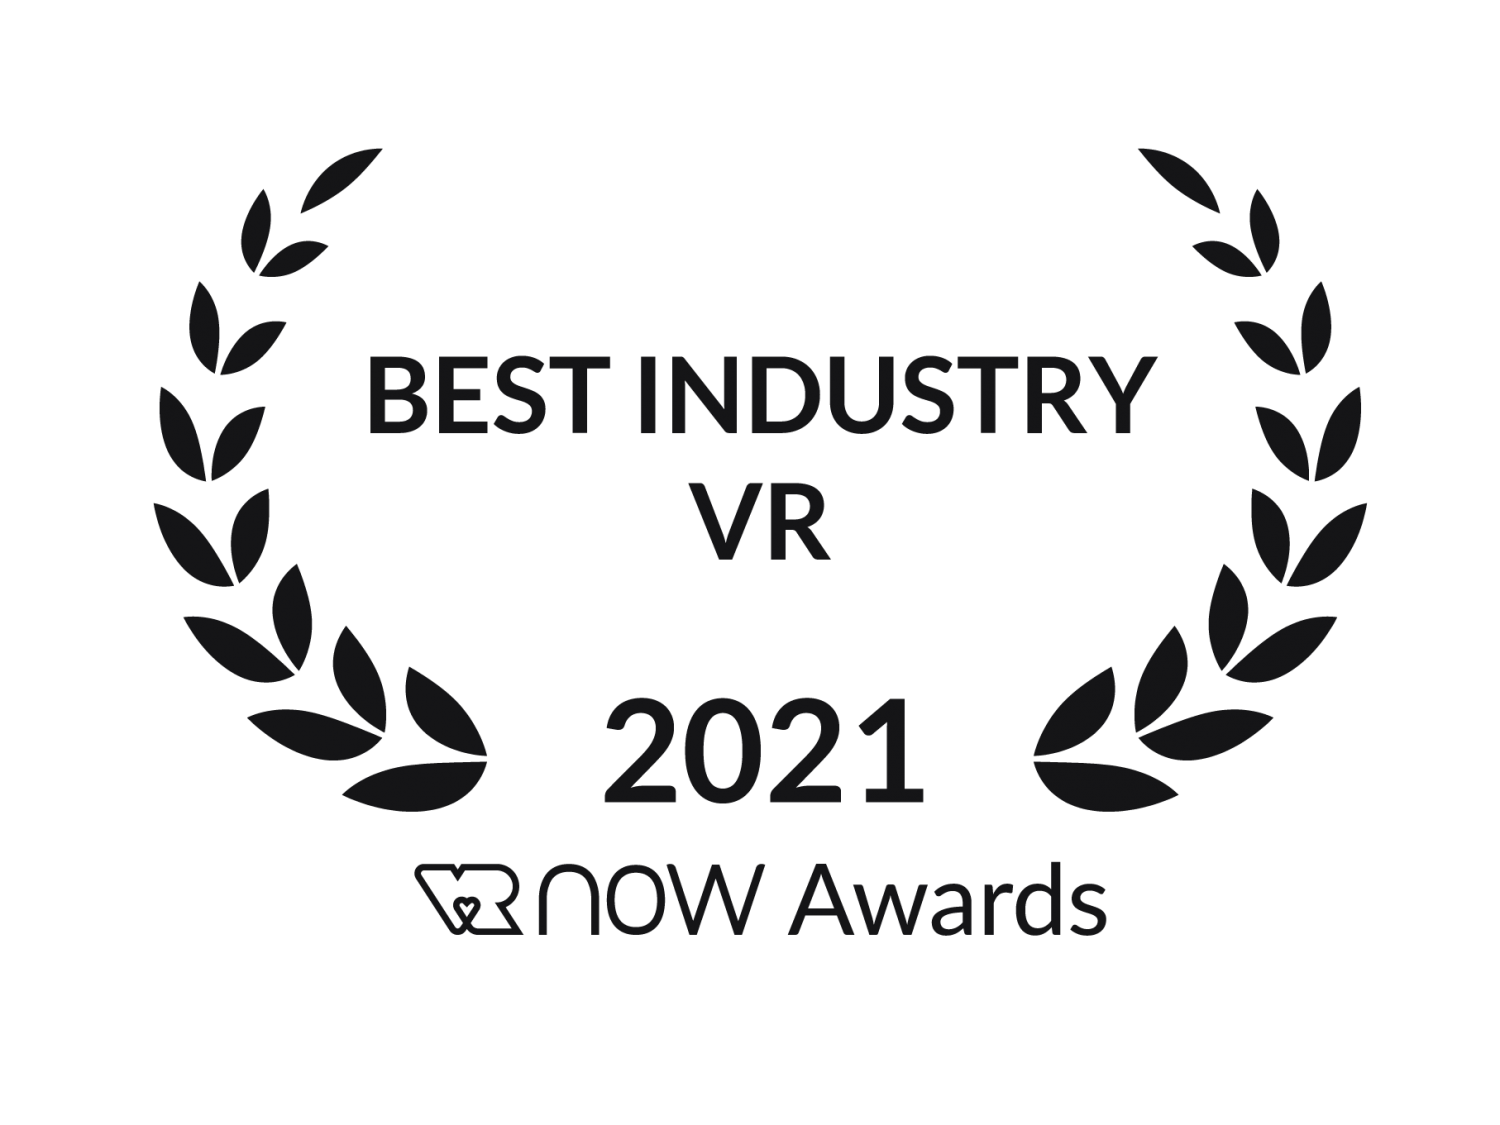 Logo Best Industry VR Award 2021 Now Awards Breakpoint One